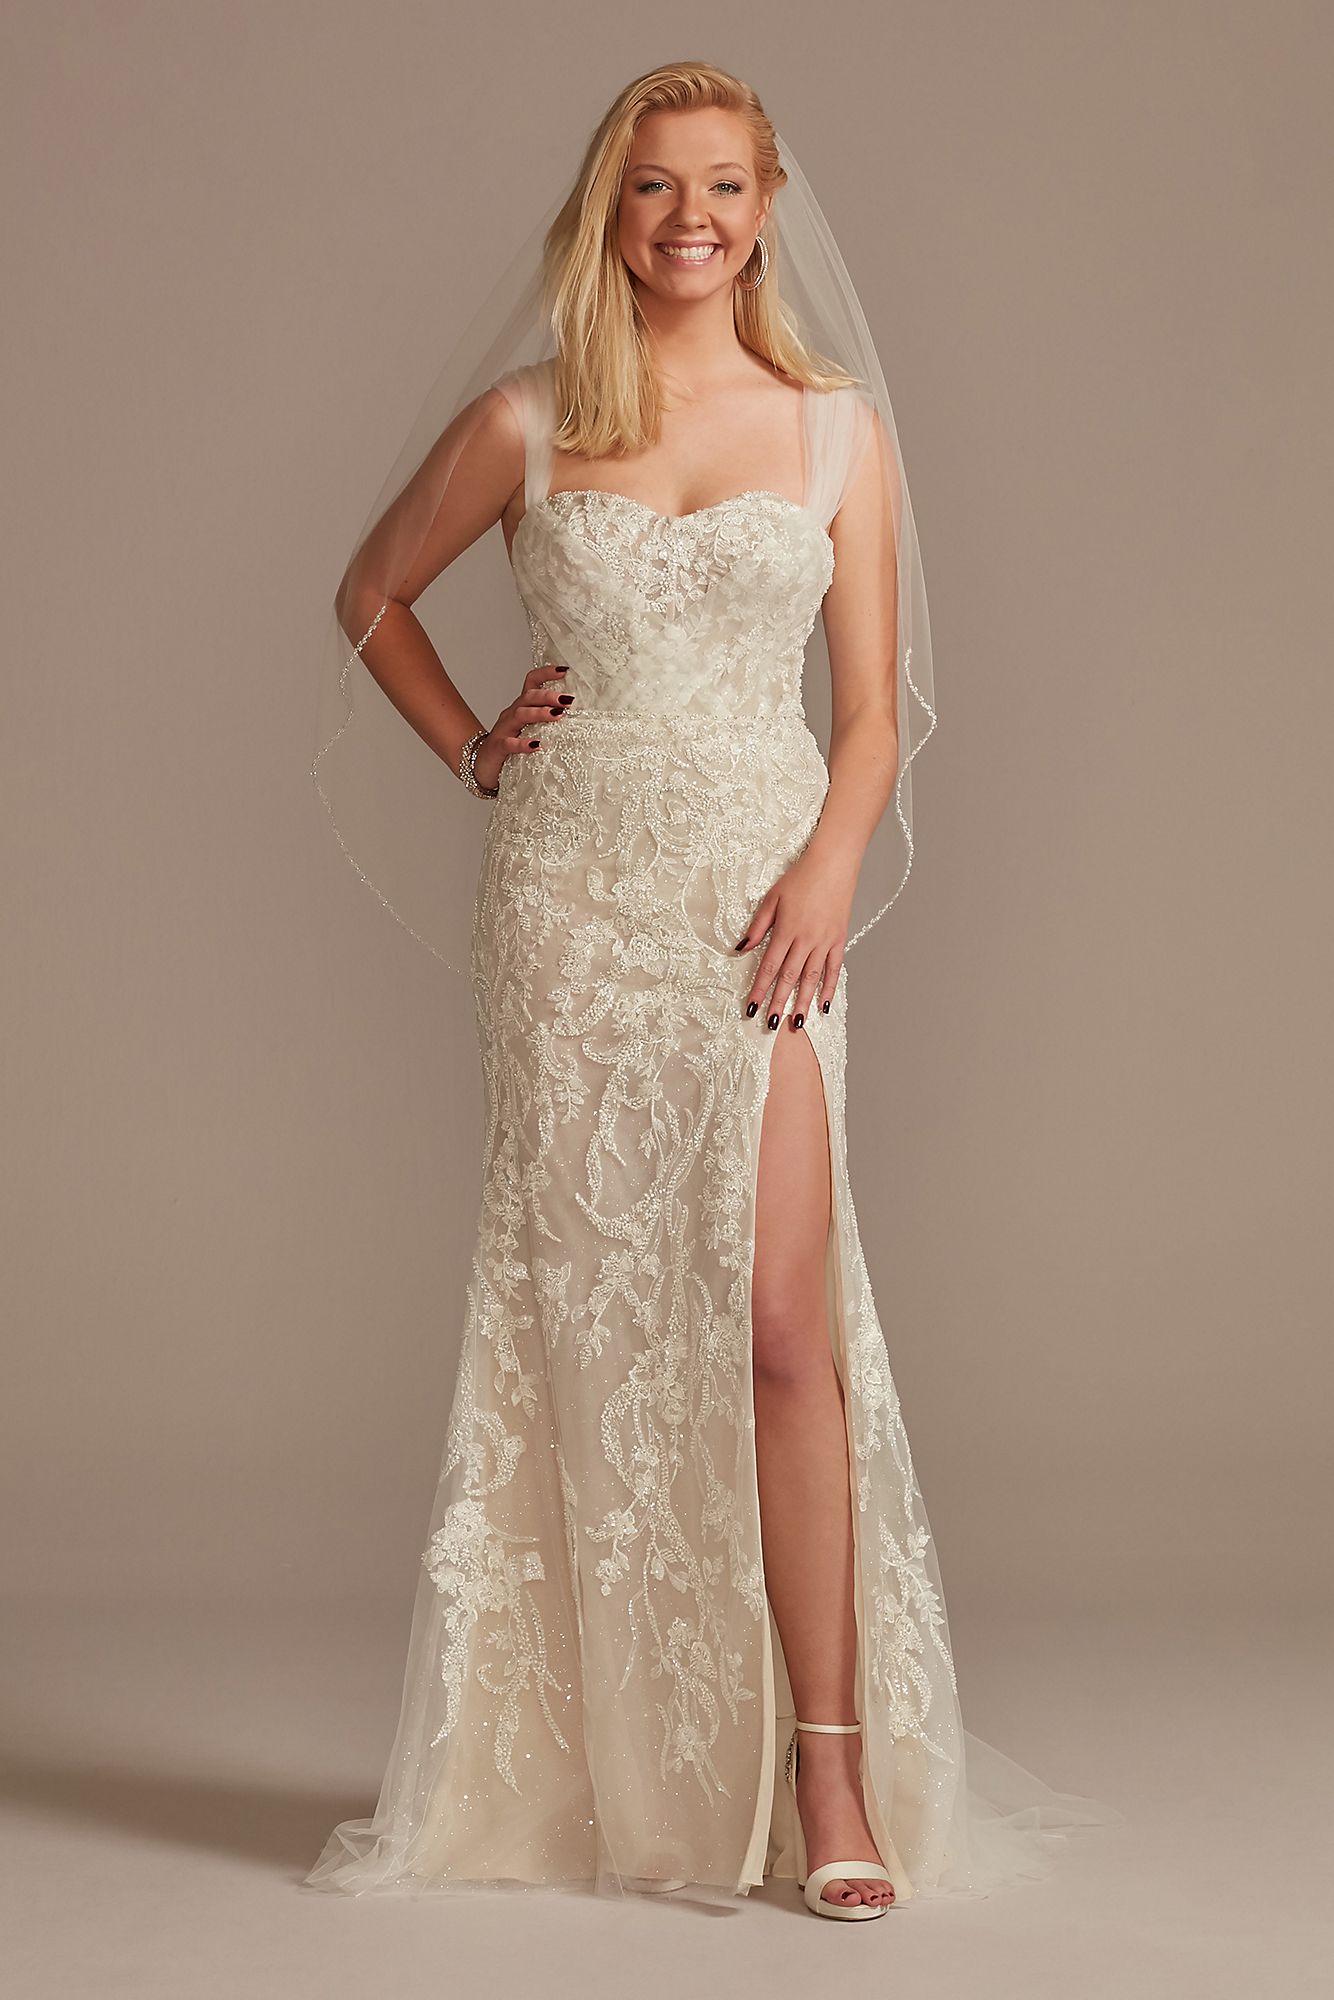 Removable Sleeves and Train Bodysuit Wedding Dress Galina Signature MBSWG881